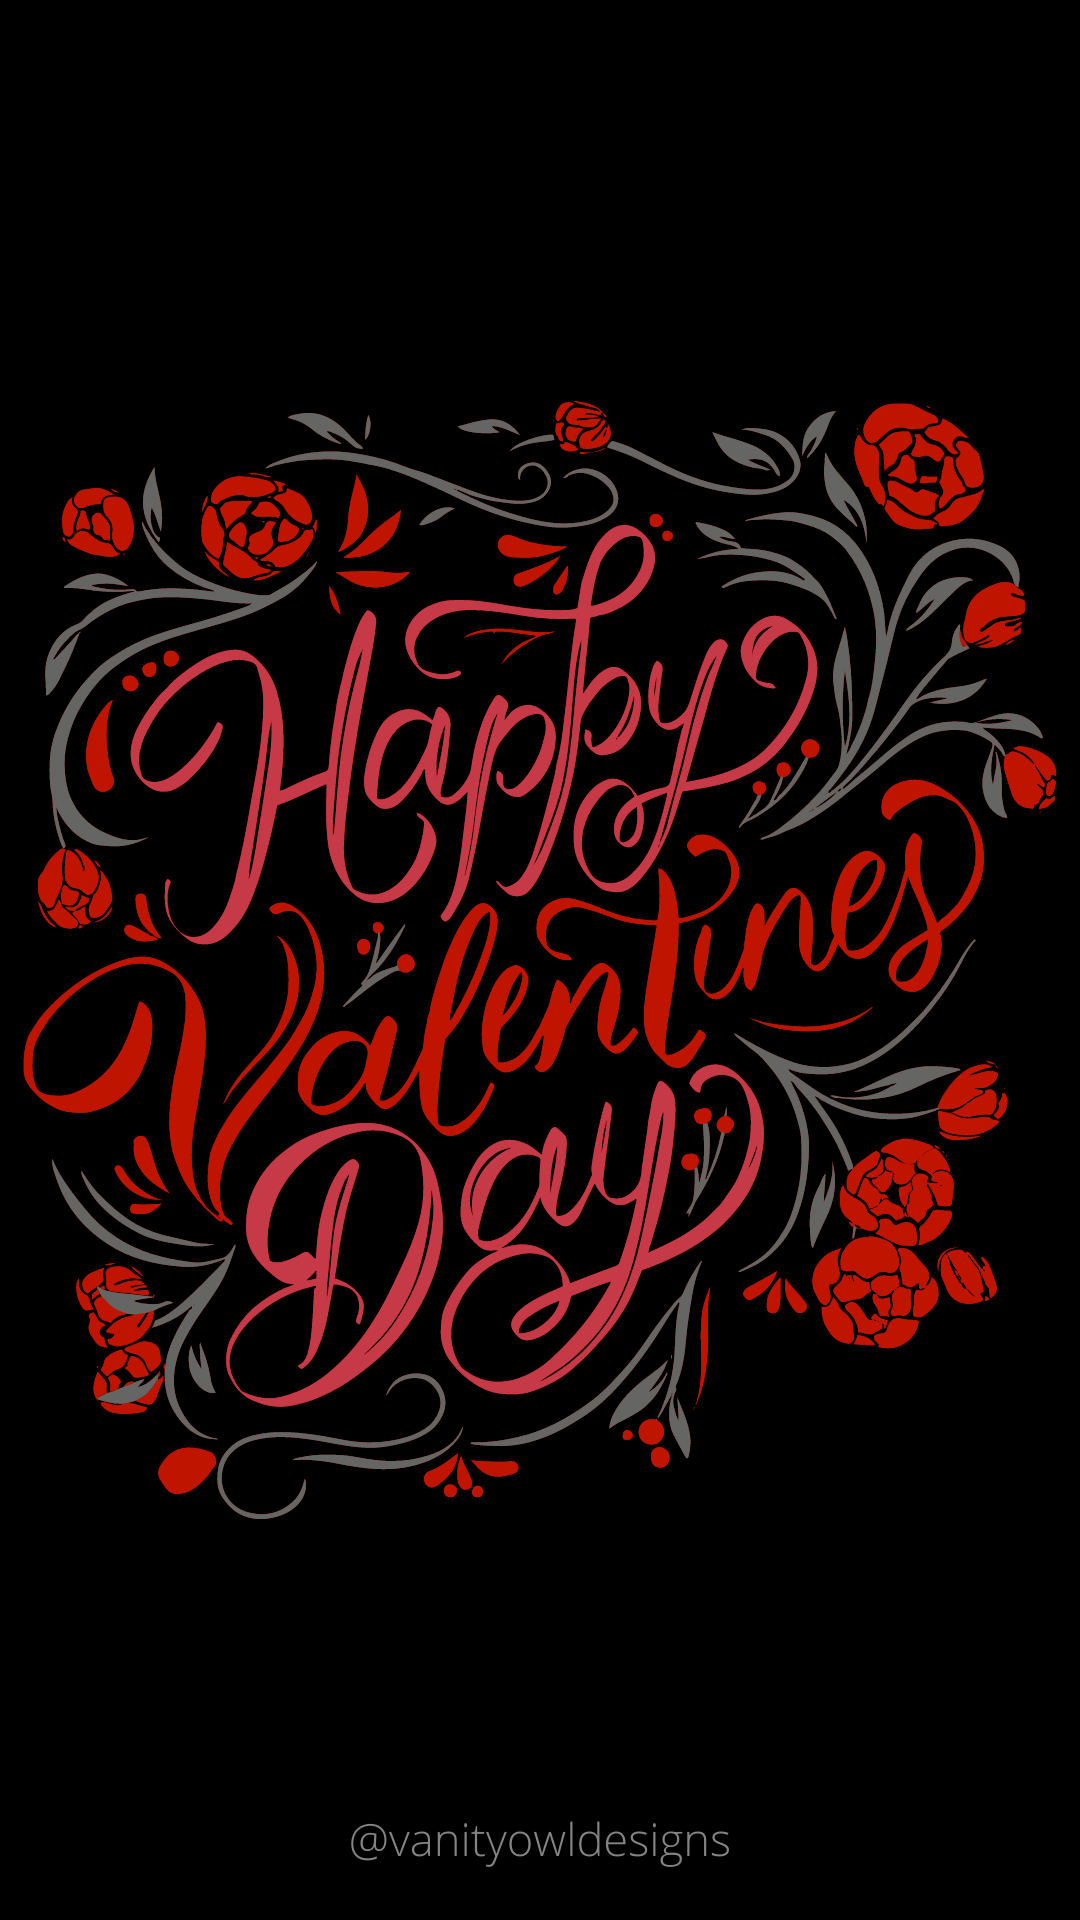 Happy Valentine's Day iPhone wallpaper. Red flowers and black background. - Valentine's Day